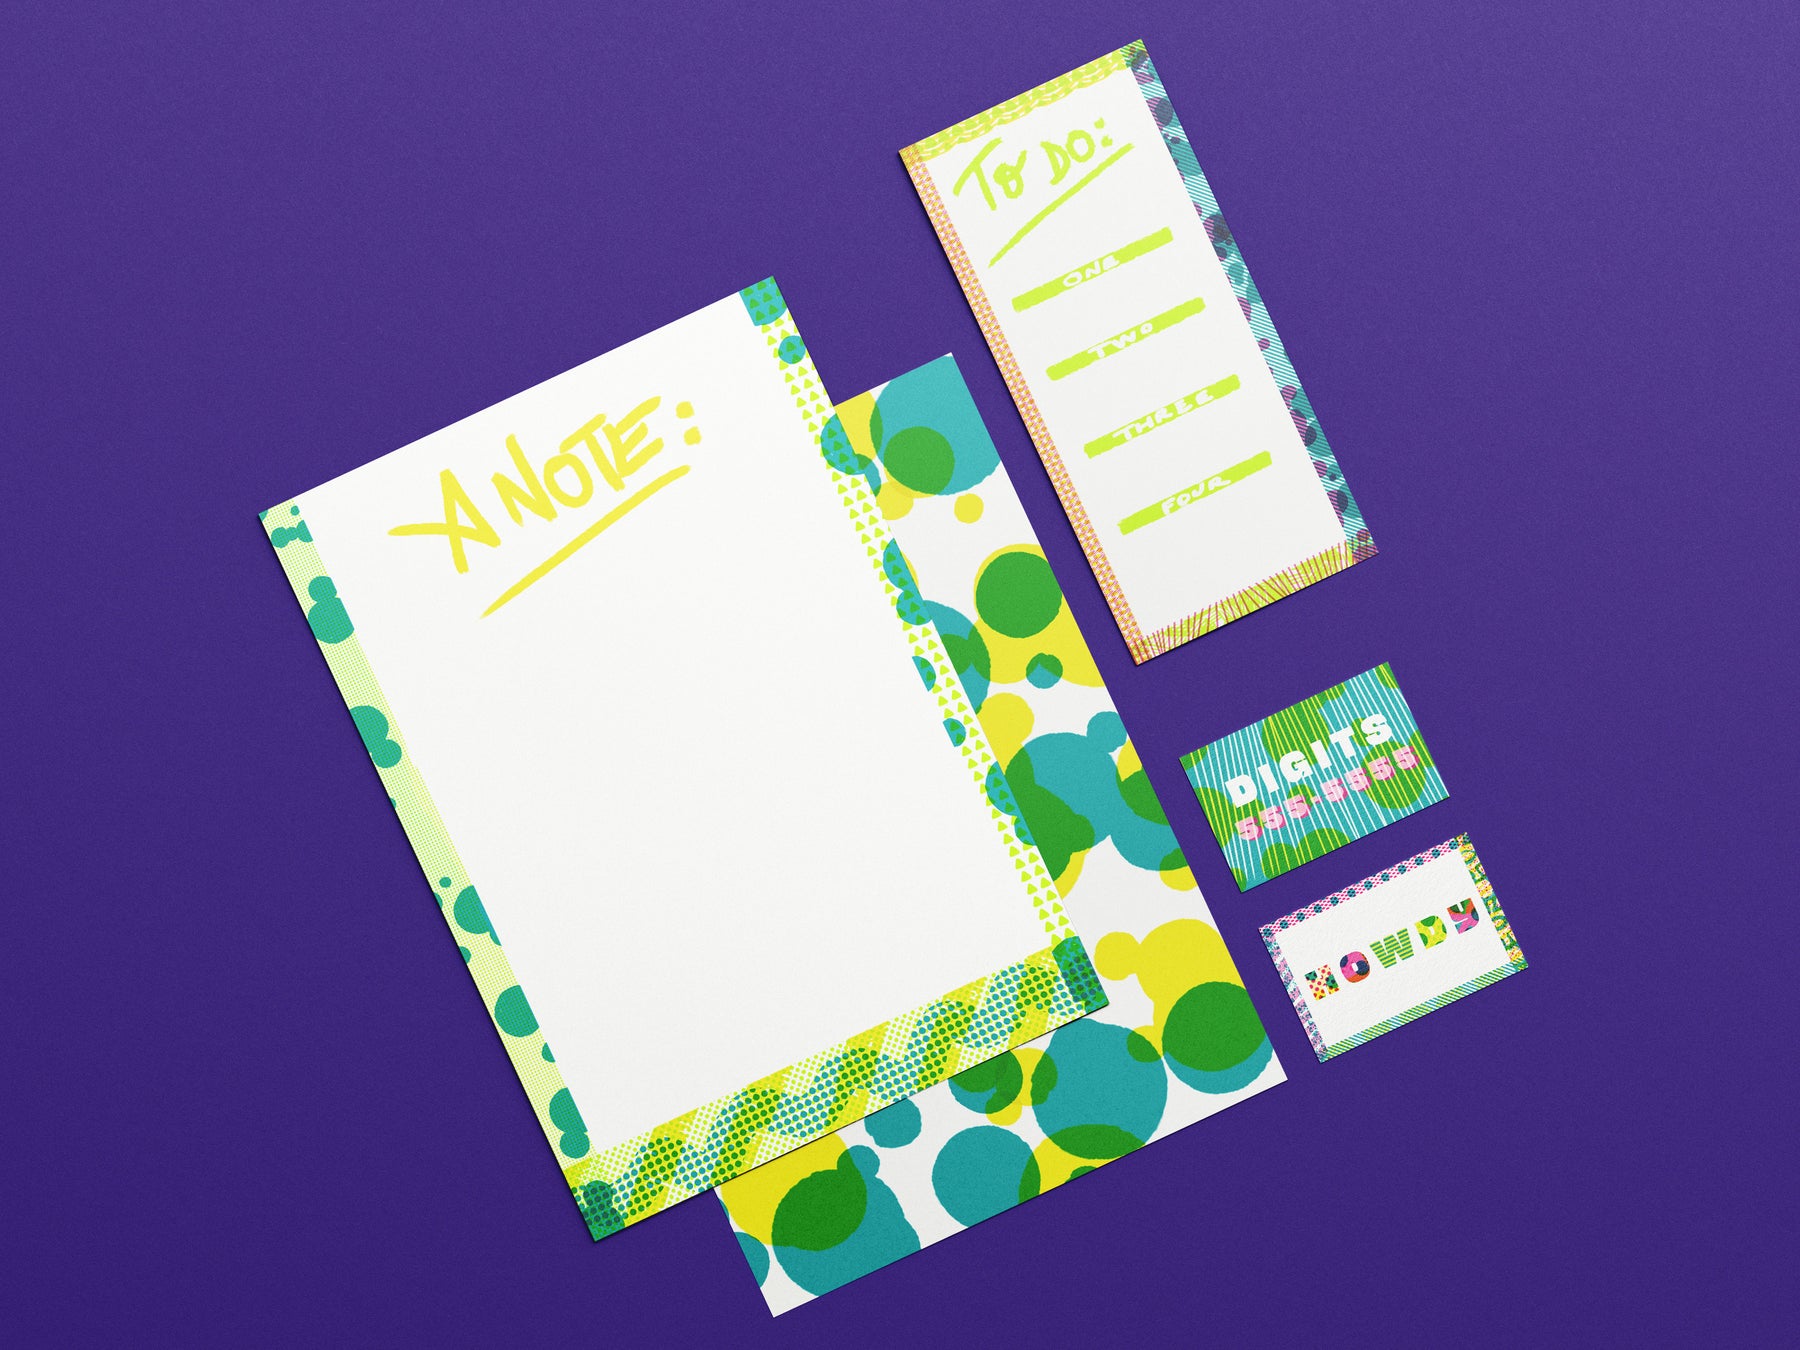 Bespoke stationery notepads, cards and paper products